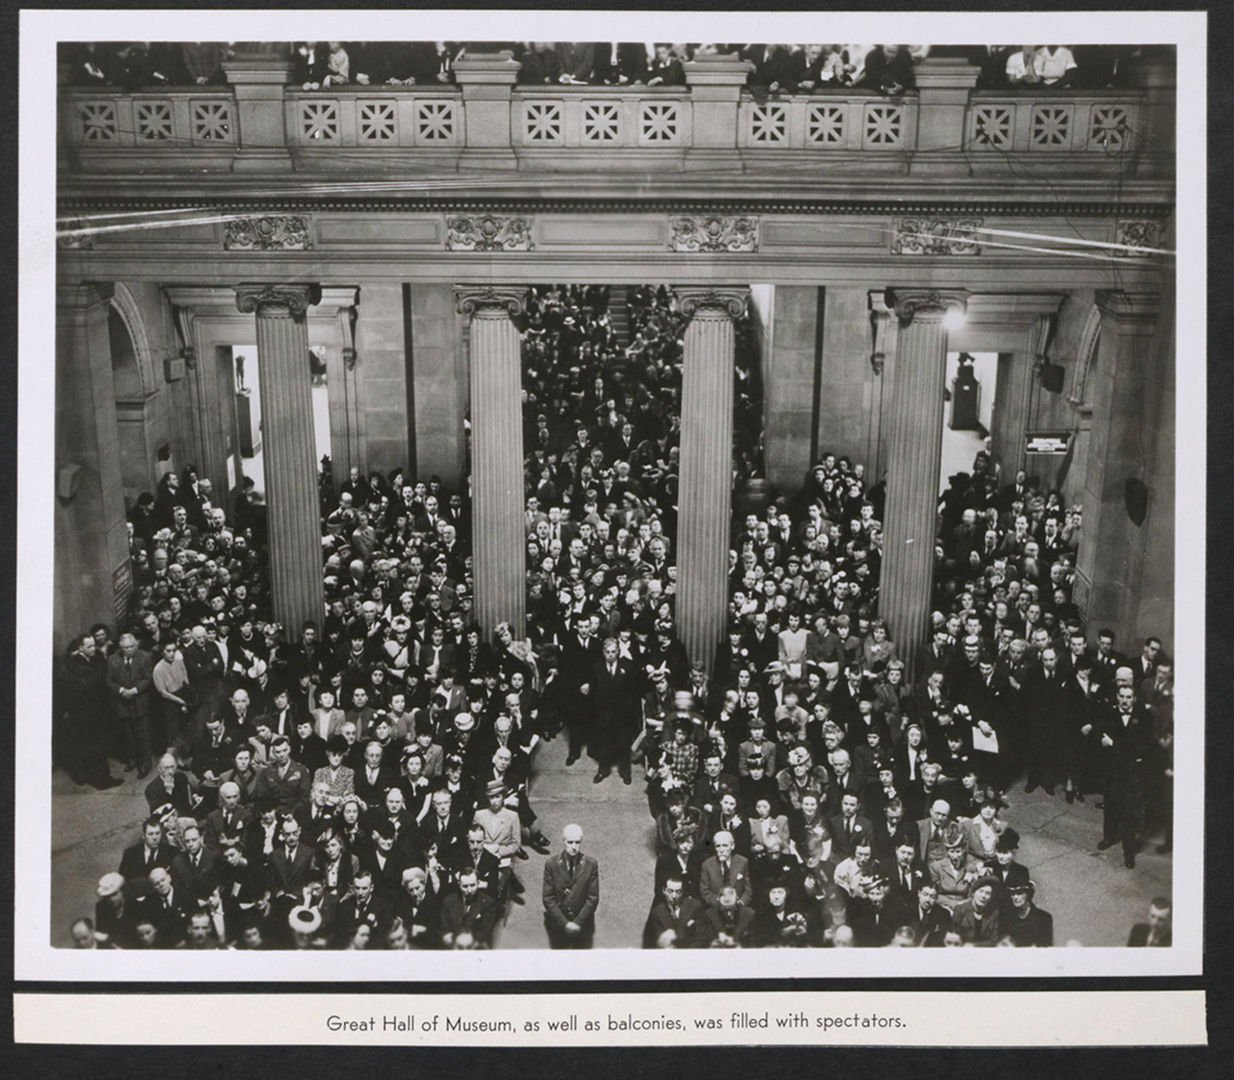 A black-and-white photograph of the Great Hall of the Metropolitan Museum of Art filled with spectators